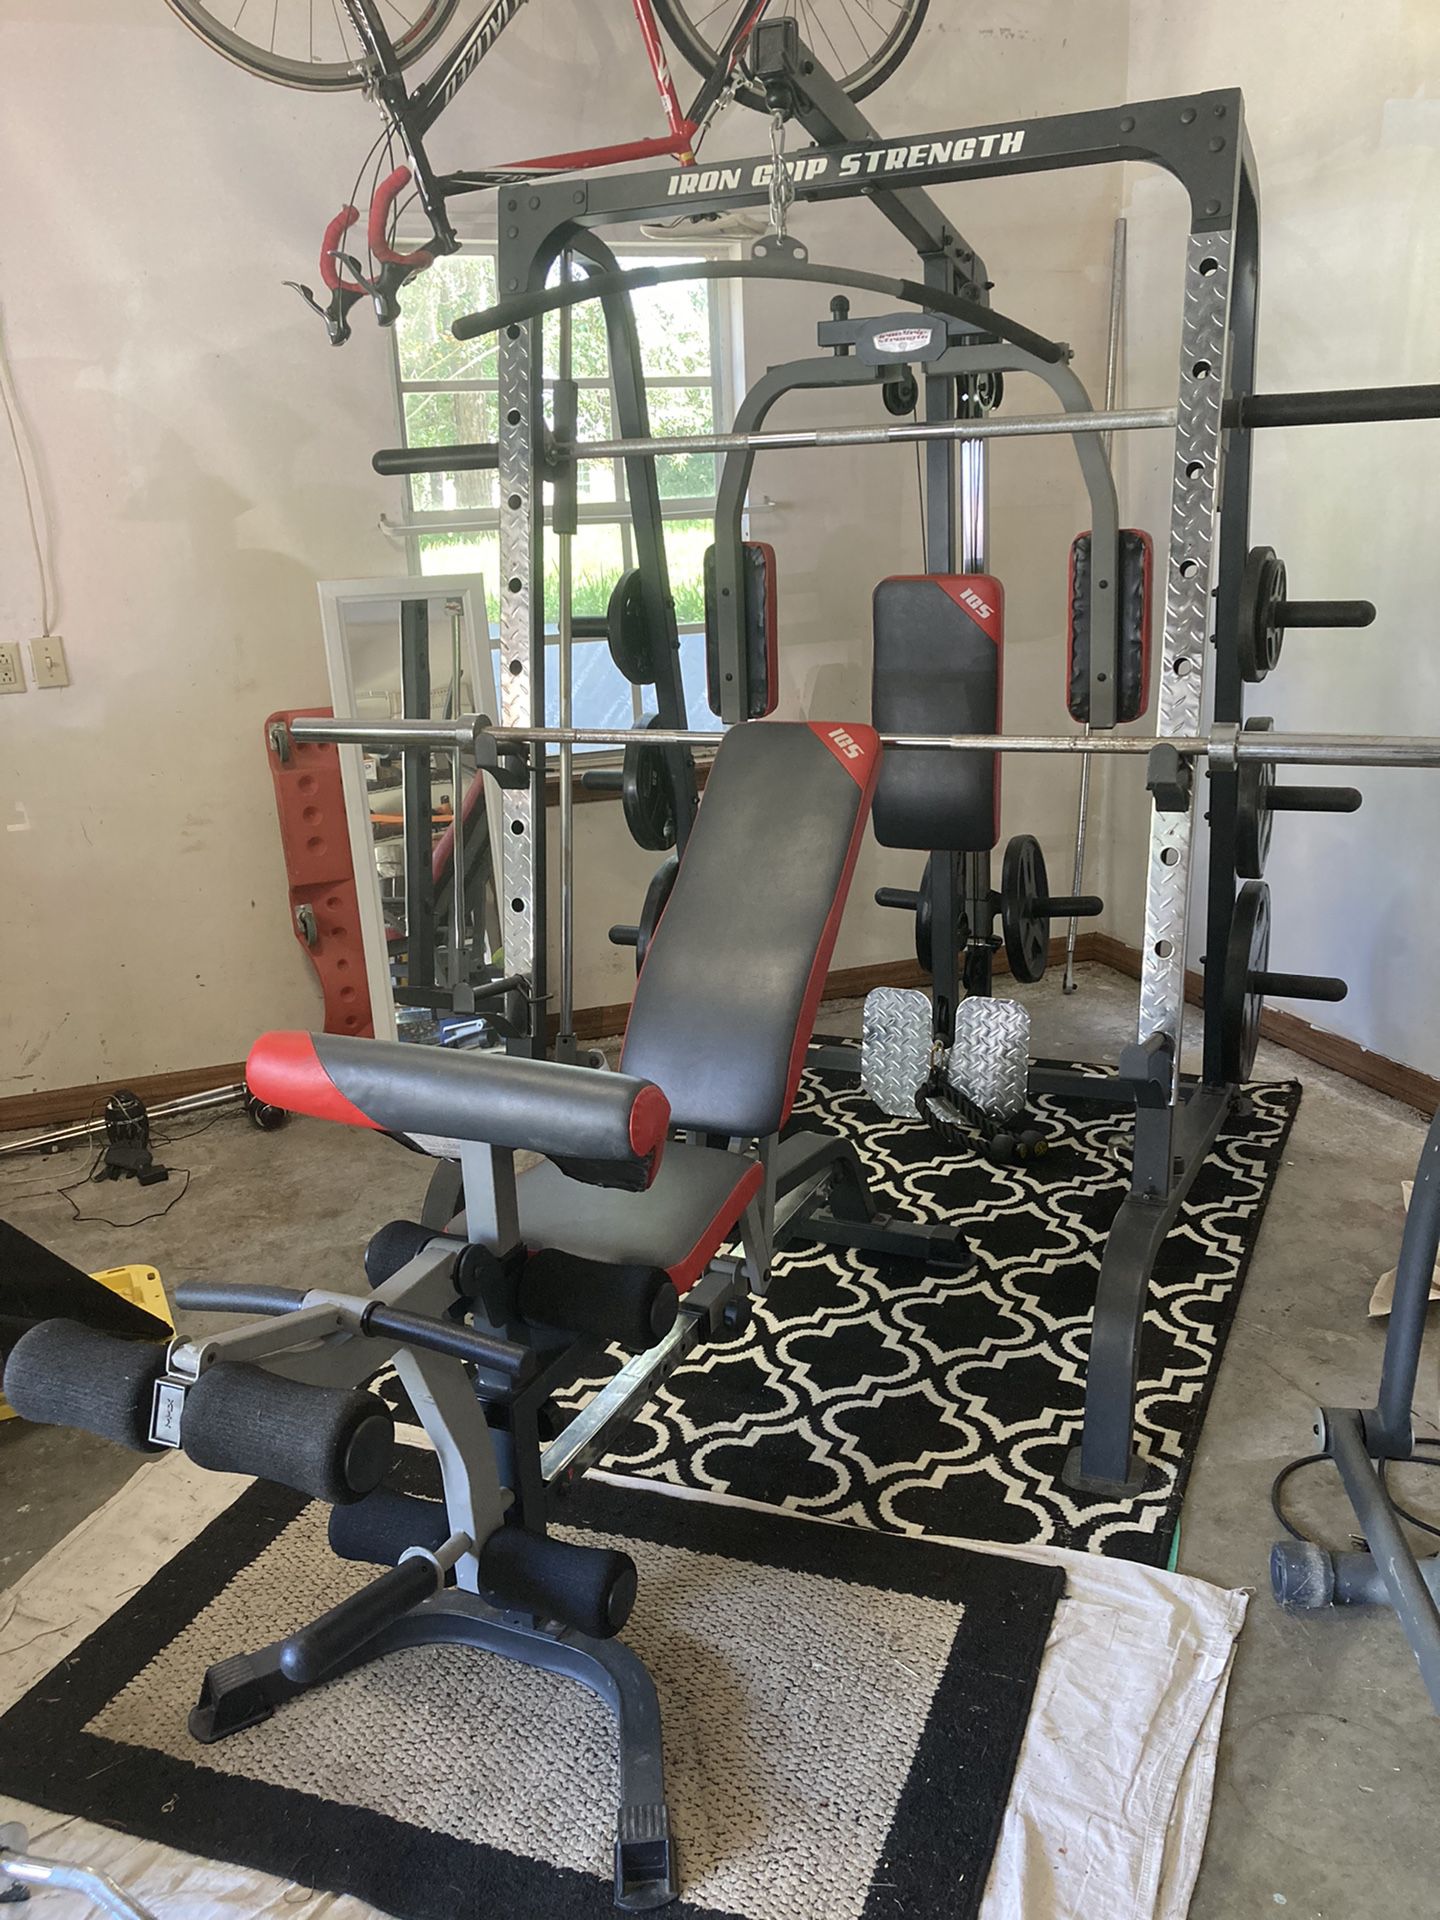 Impex Iron Grip Strength Home Gym - Smith Machine With Weights for Sale ...